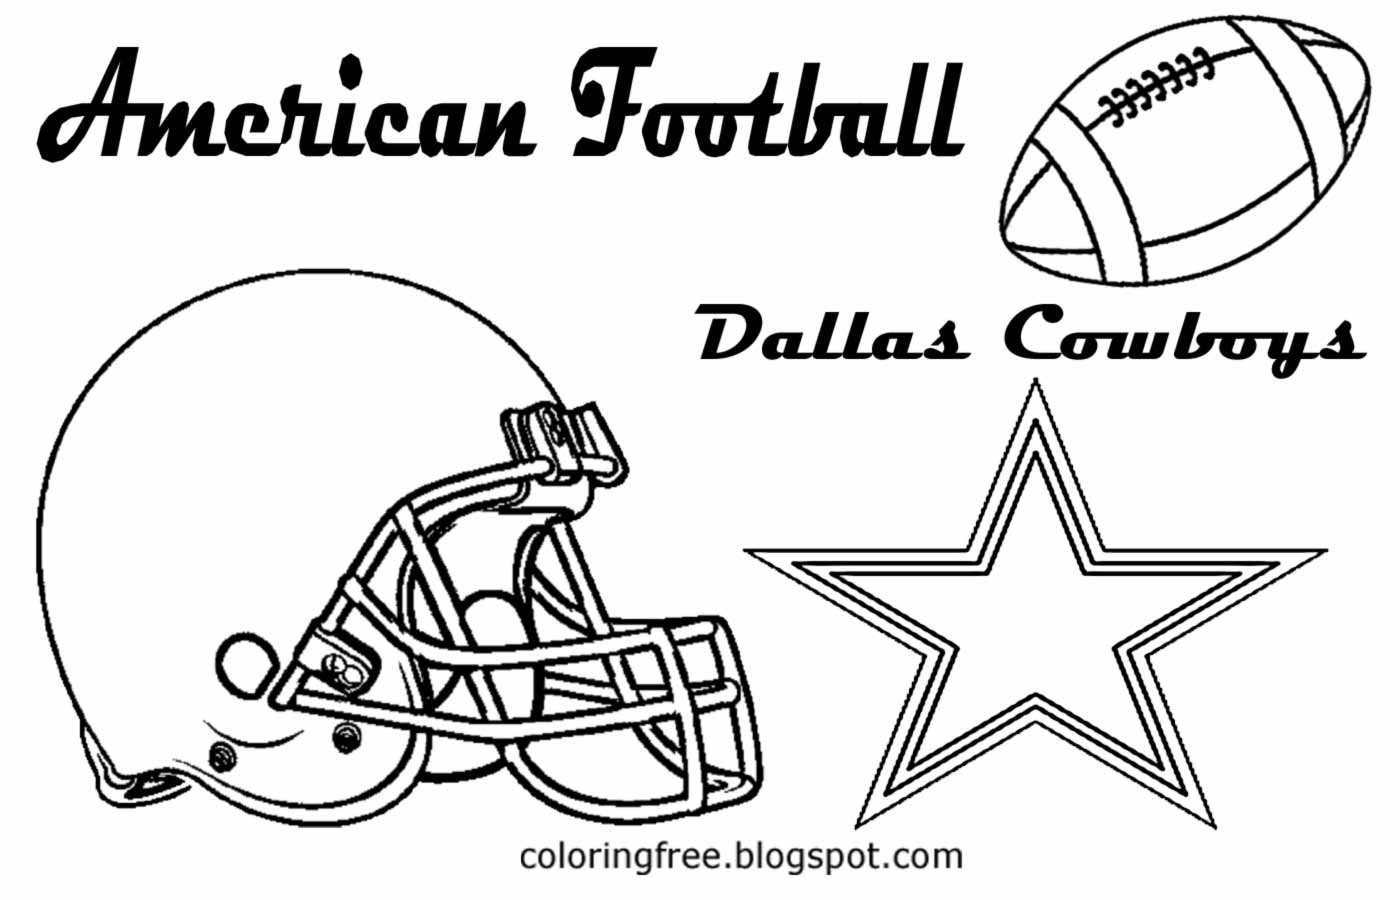 Dallas Cowboys Coloring Pages To Print
 Free Coloring Pages Printable To Color Kids